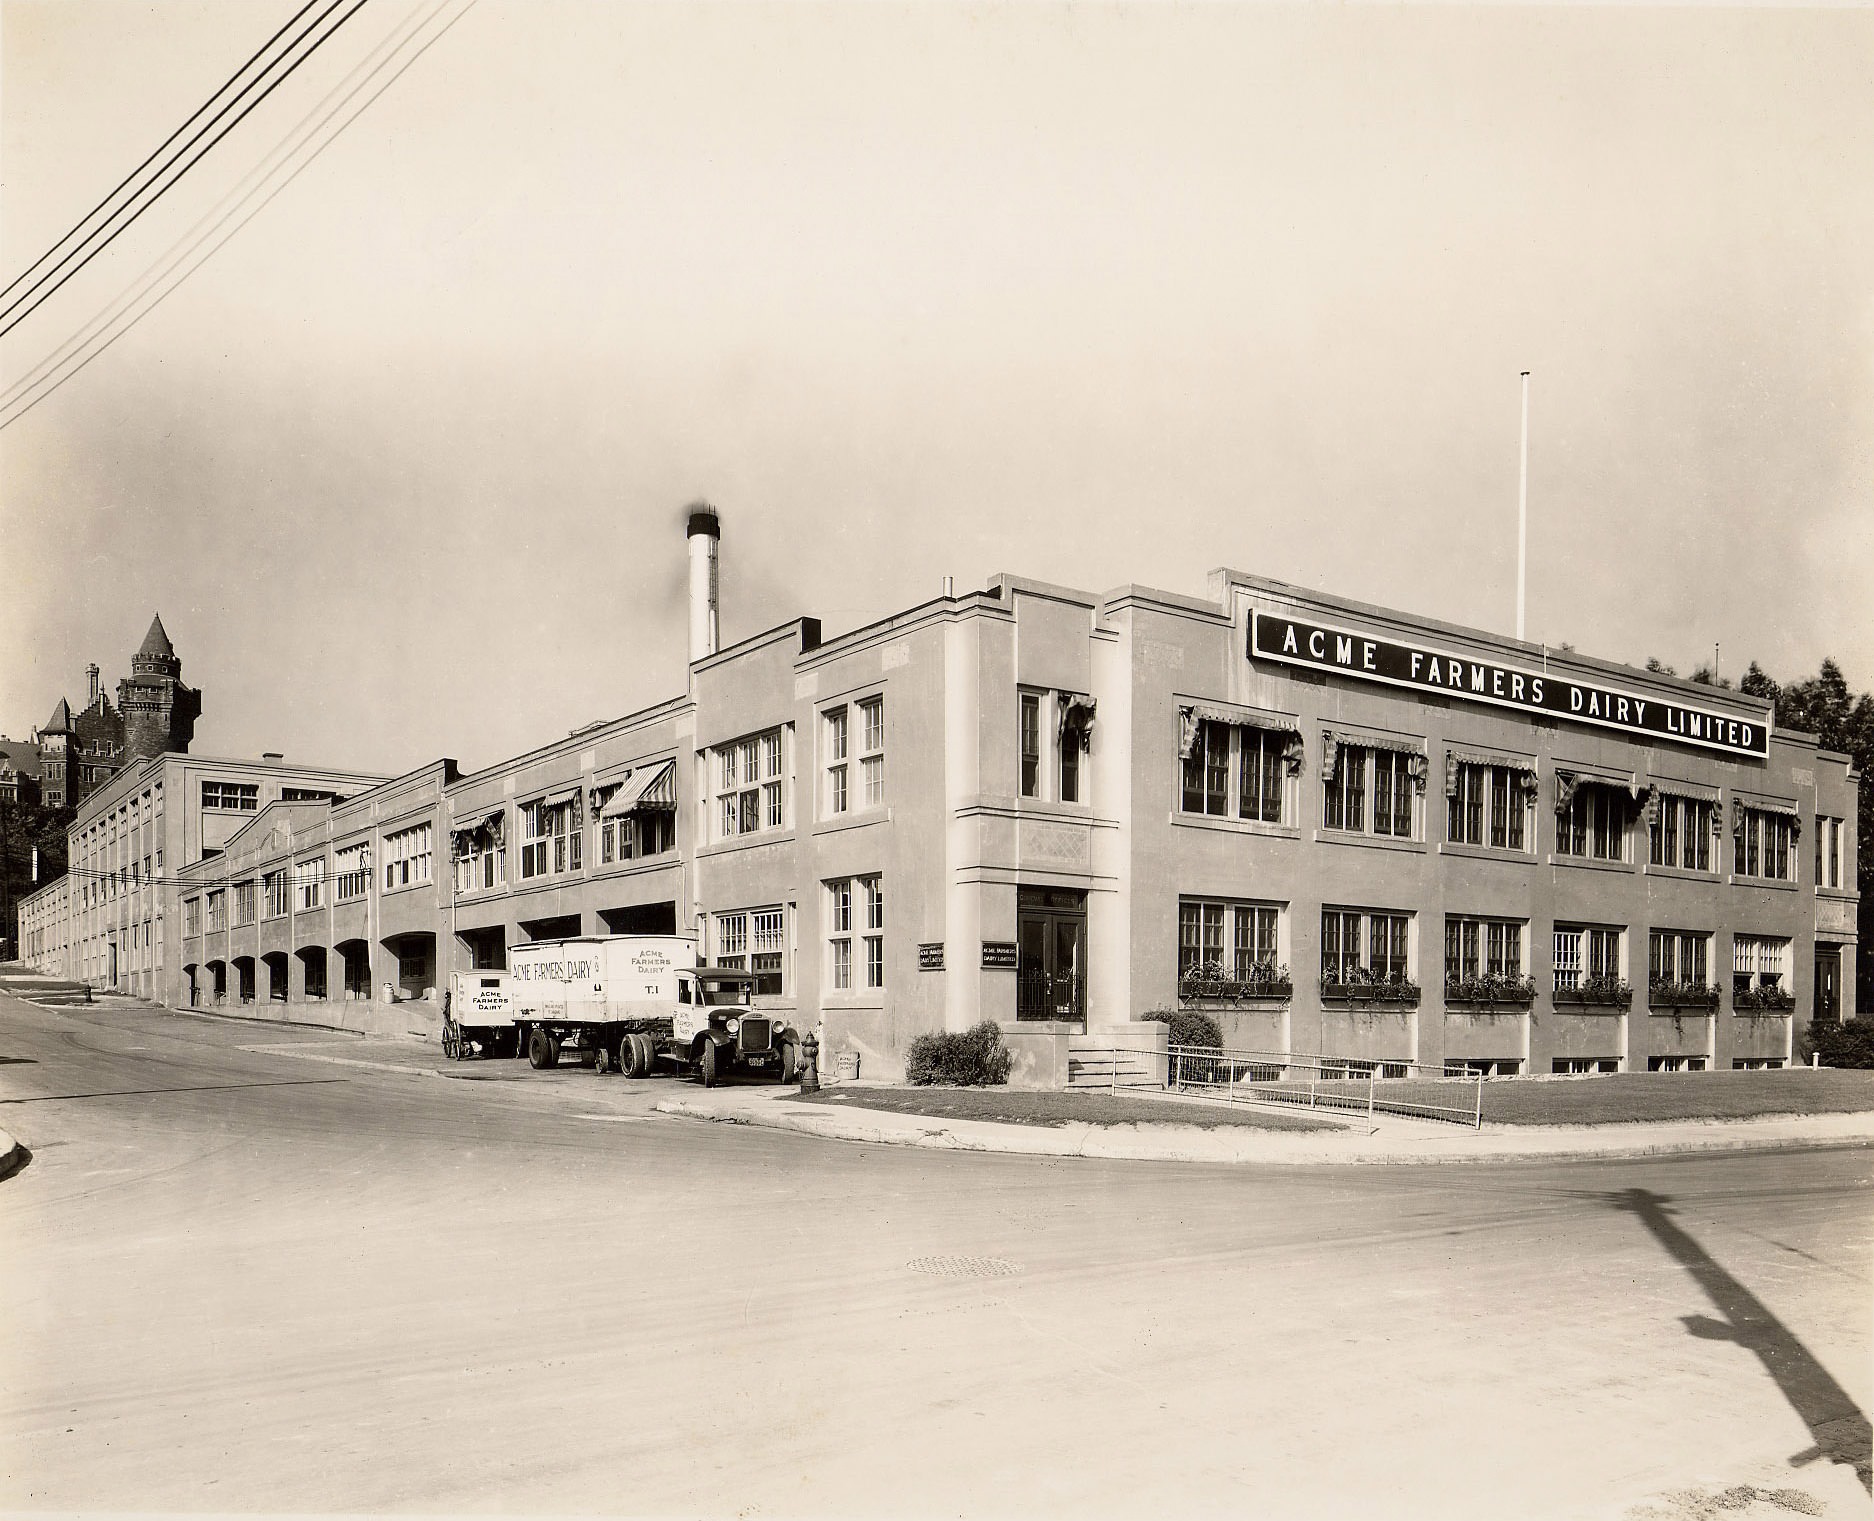 Acme Farmers Dairy factory, northeast corner of Walmer Rd. & Macpherson Ave., 1940s